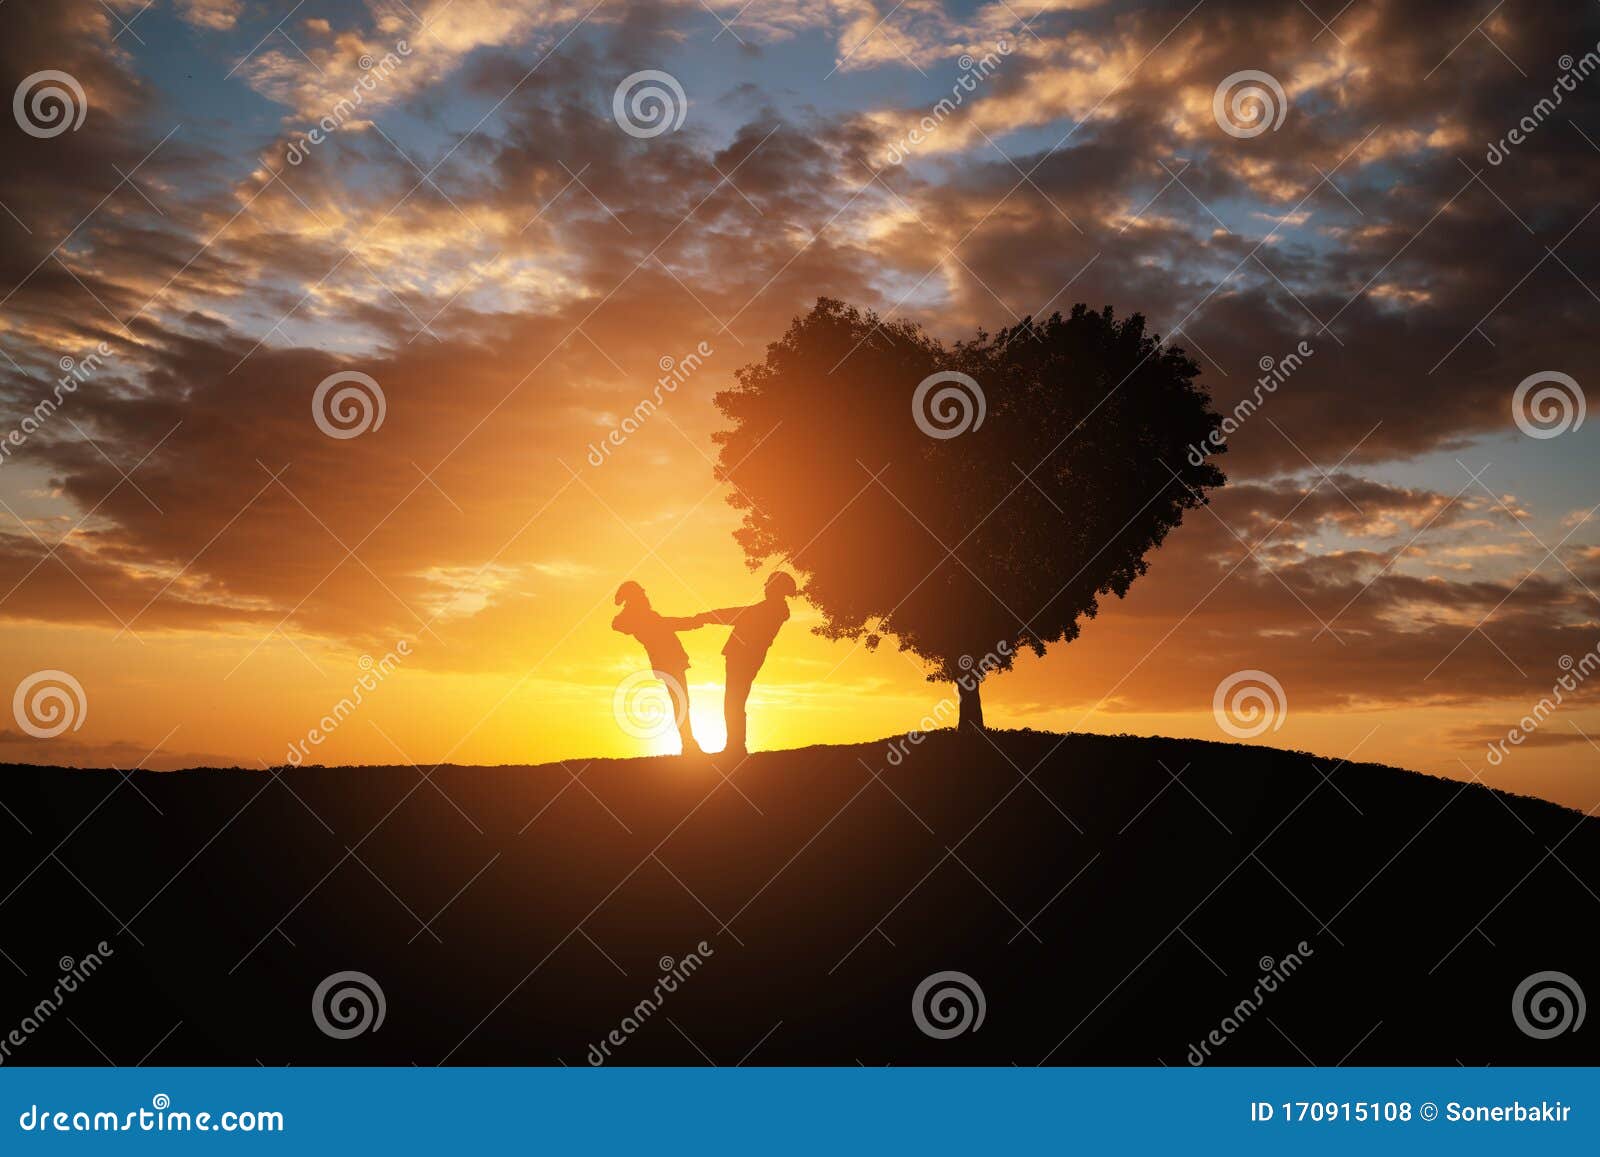 silhouette of a couple in abstract field with heart  tree with sunset.romance and valentine concept background.